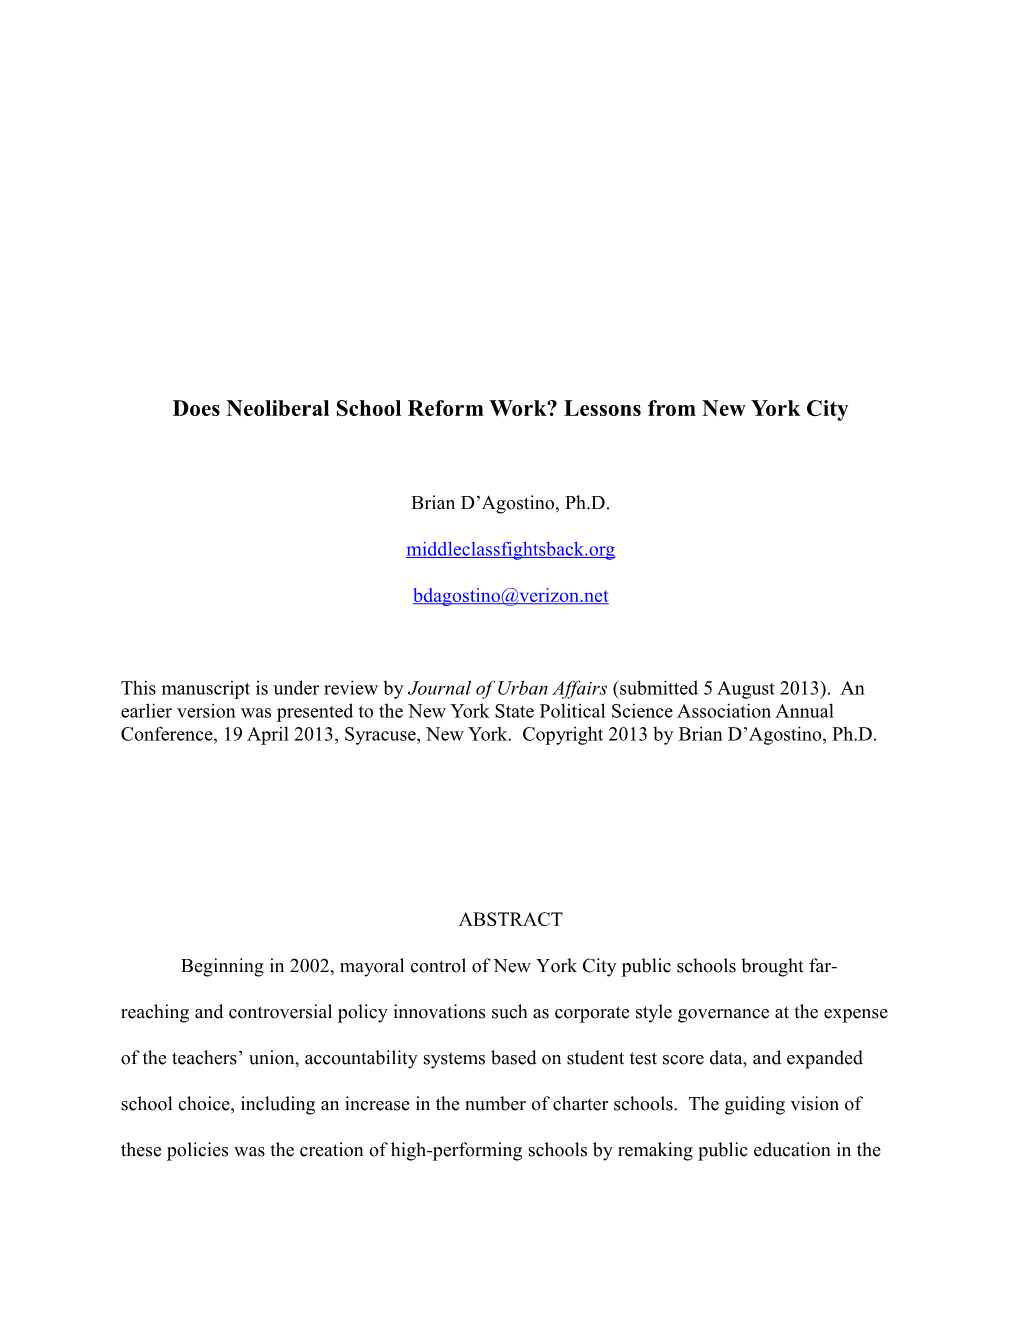 Does Neoliberal School Reform Work? Lessons from New York City